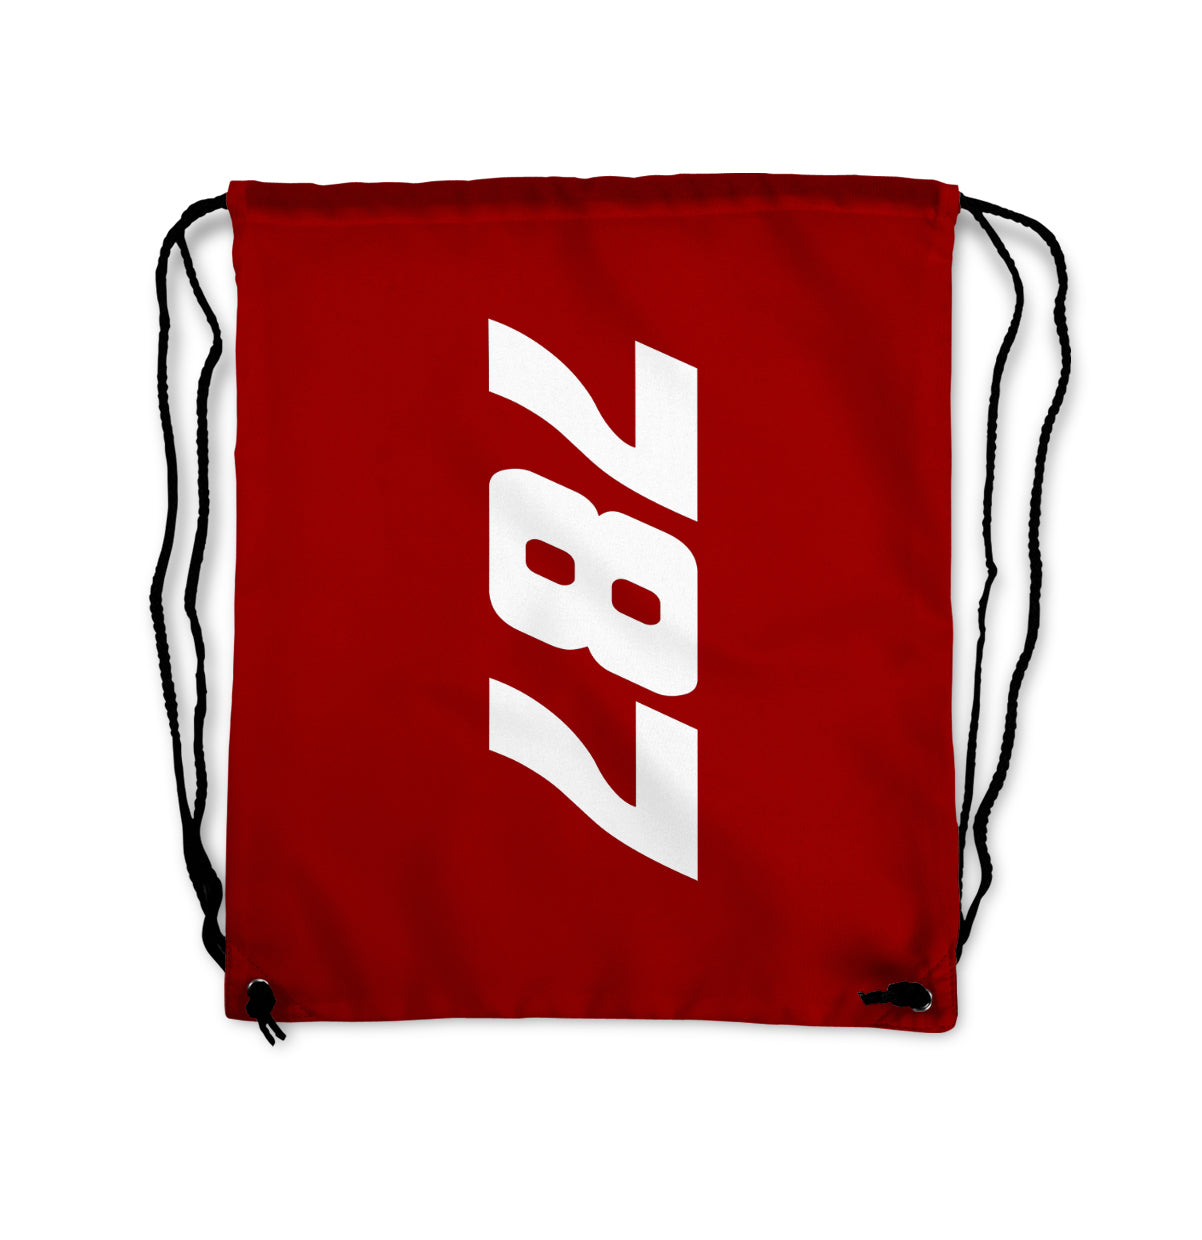 Boeing 787 Text Designed Drawstring Bags